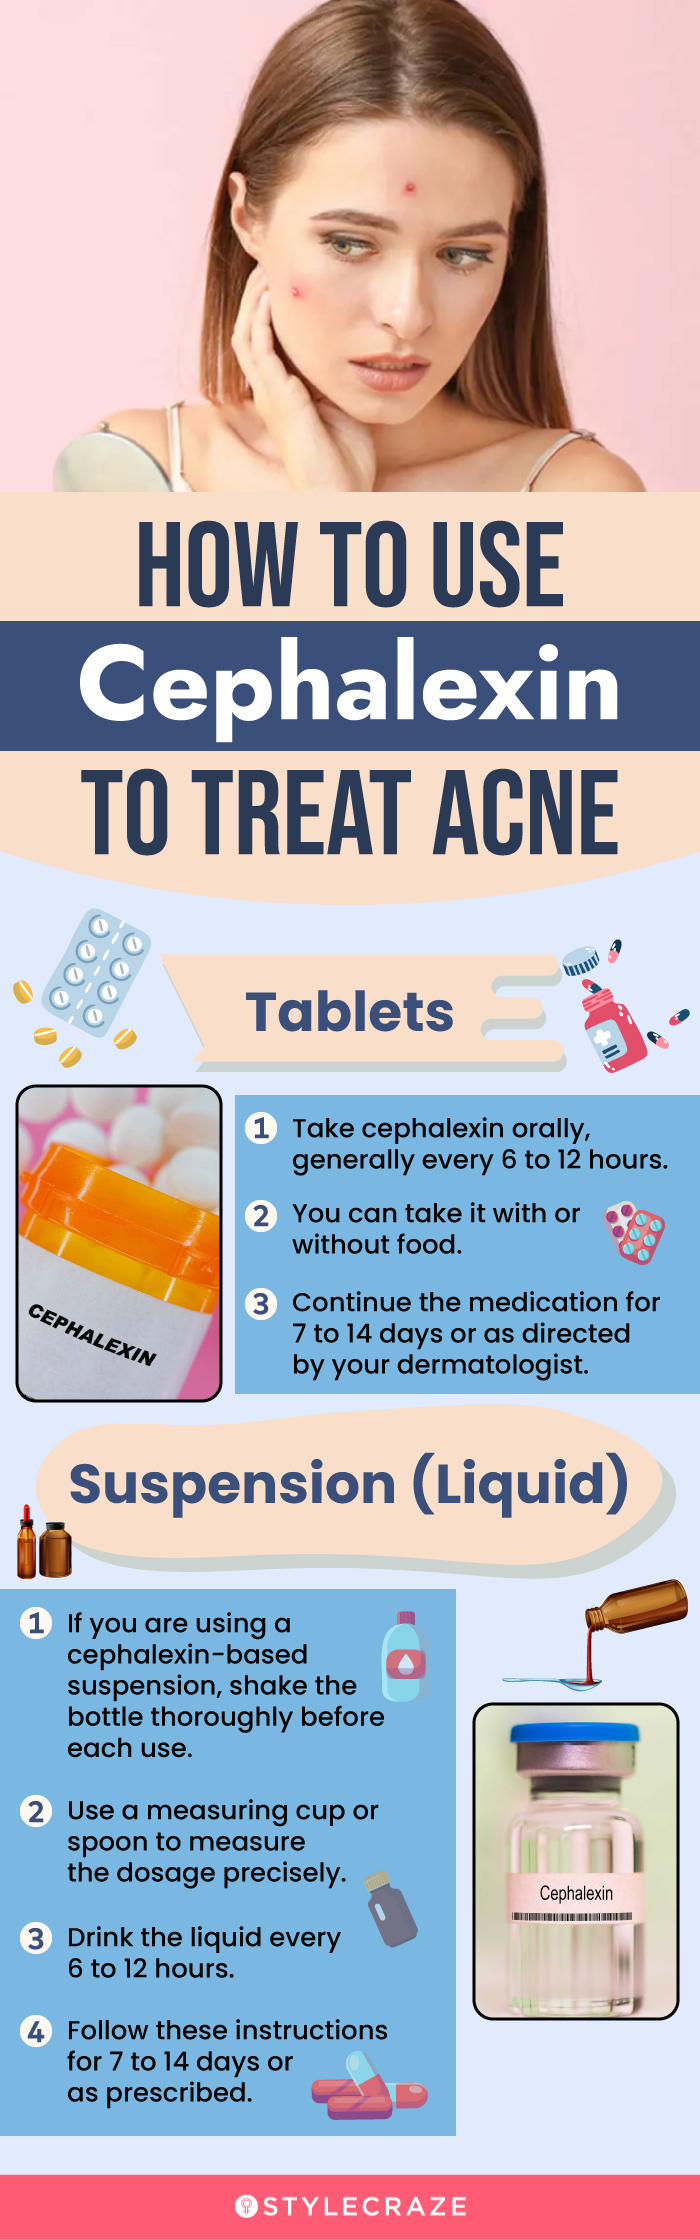 how to use cephalexin to treat acne (infographic)